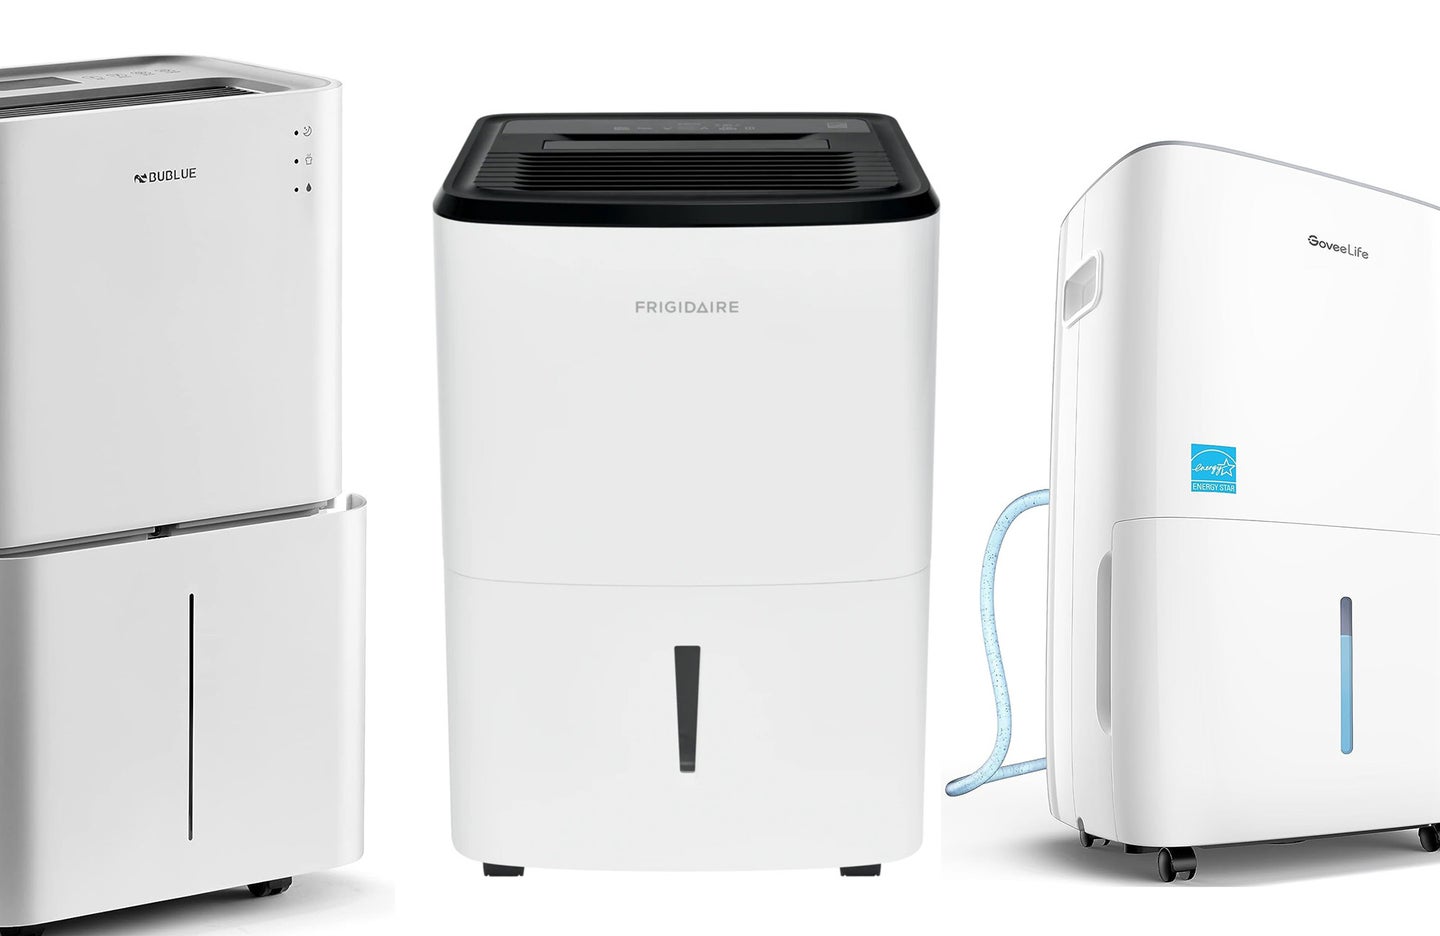 The best dehumidifiers for basements will help keep the air in your home cool and dry.